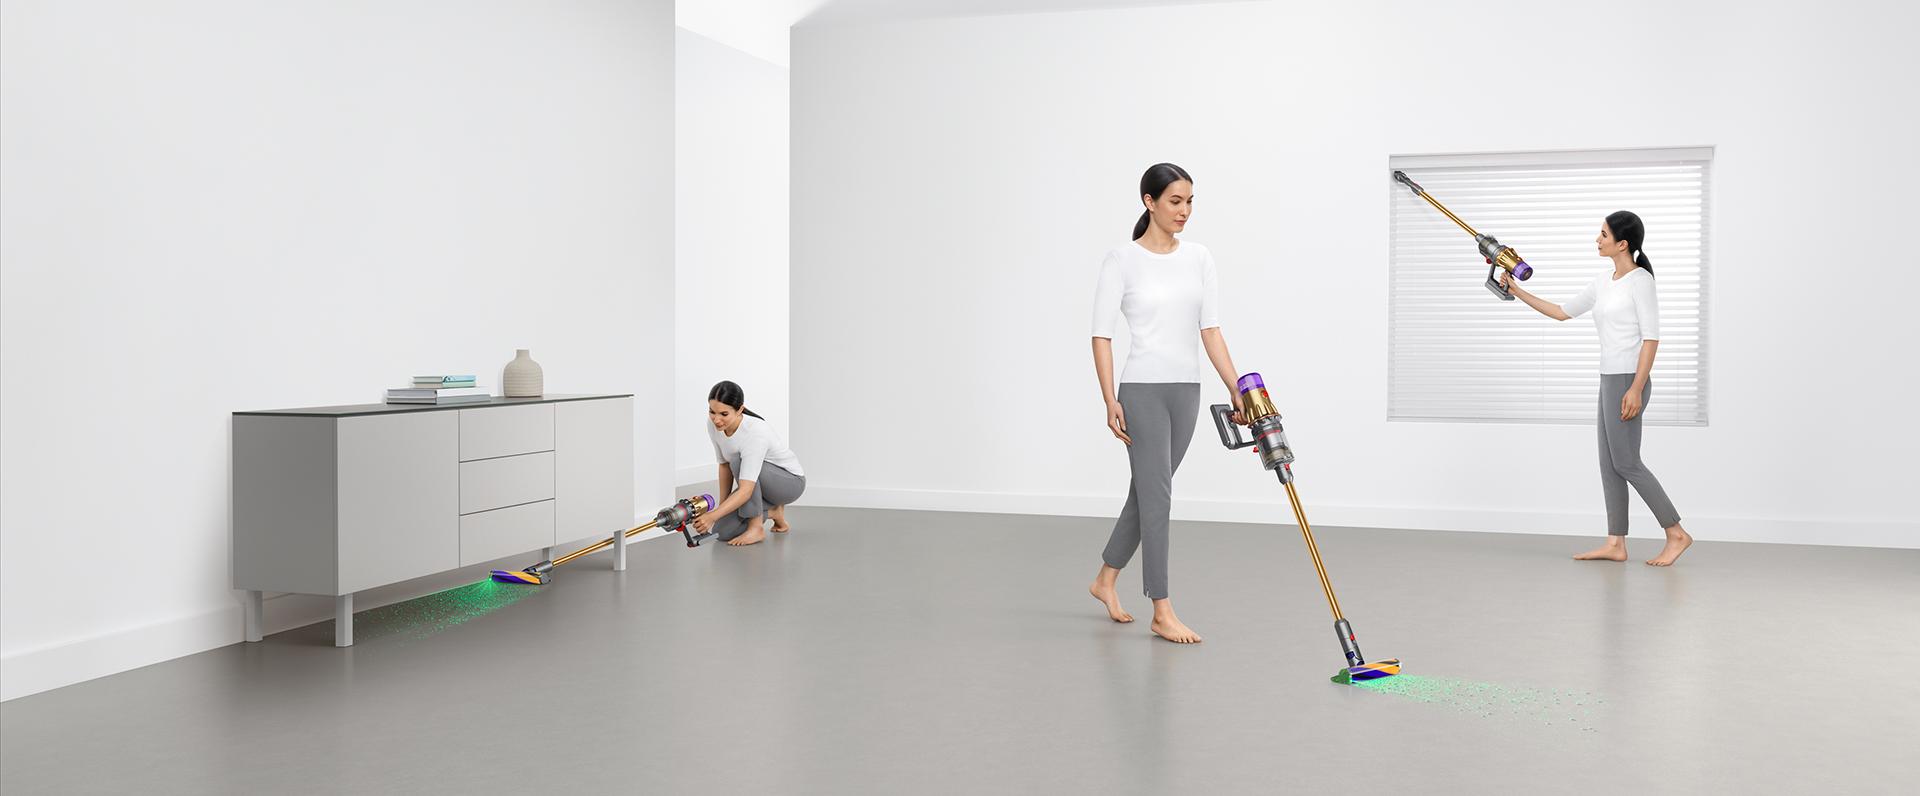 Dyson home cleaning